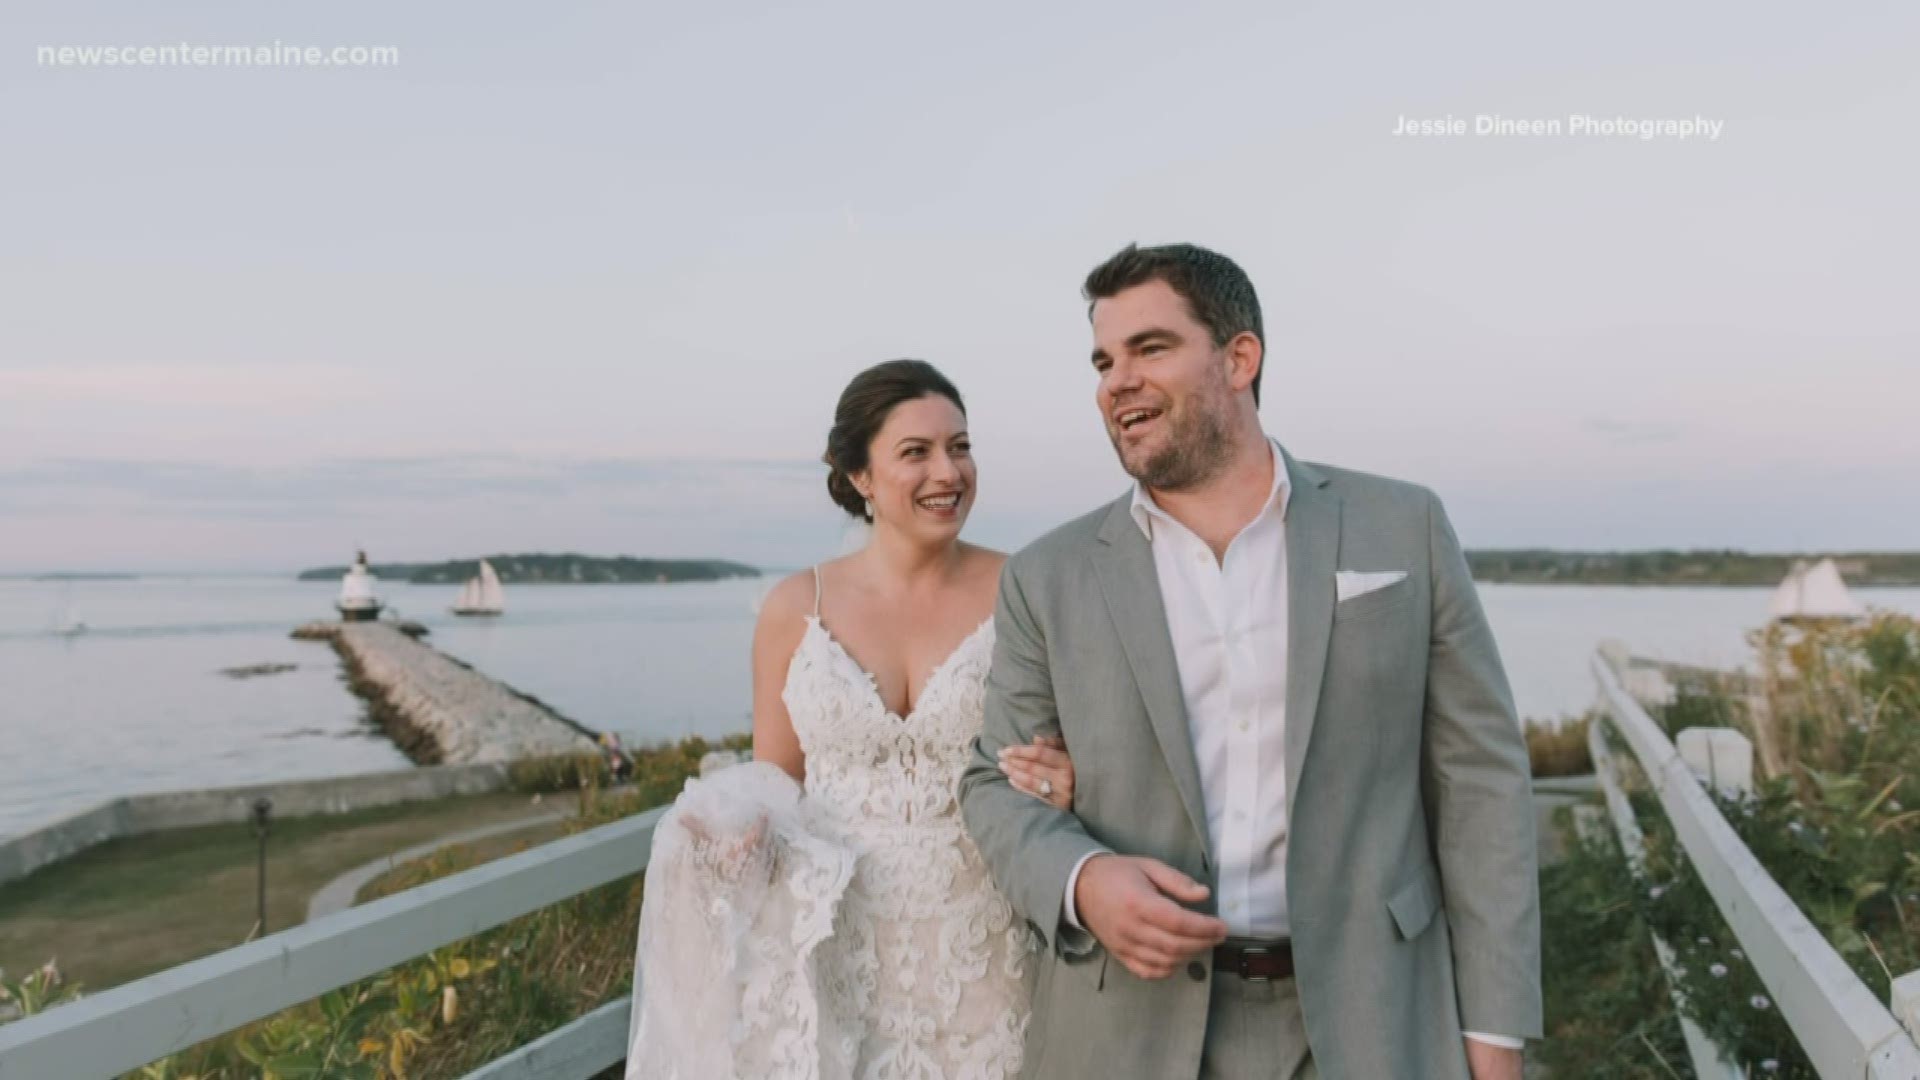 NEWS CENTER Maine's Jessica Gagne and her fiancé Jack are married in beautiful South Portland wedding